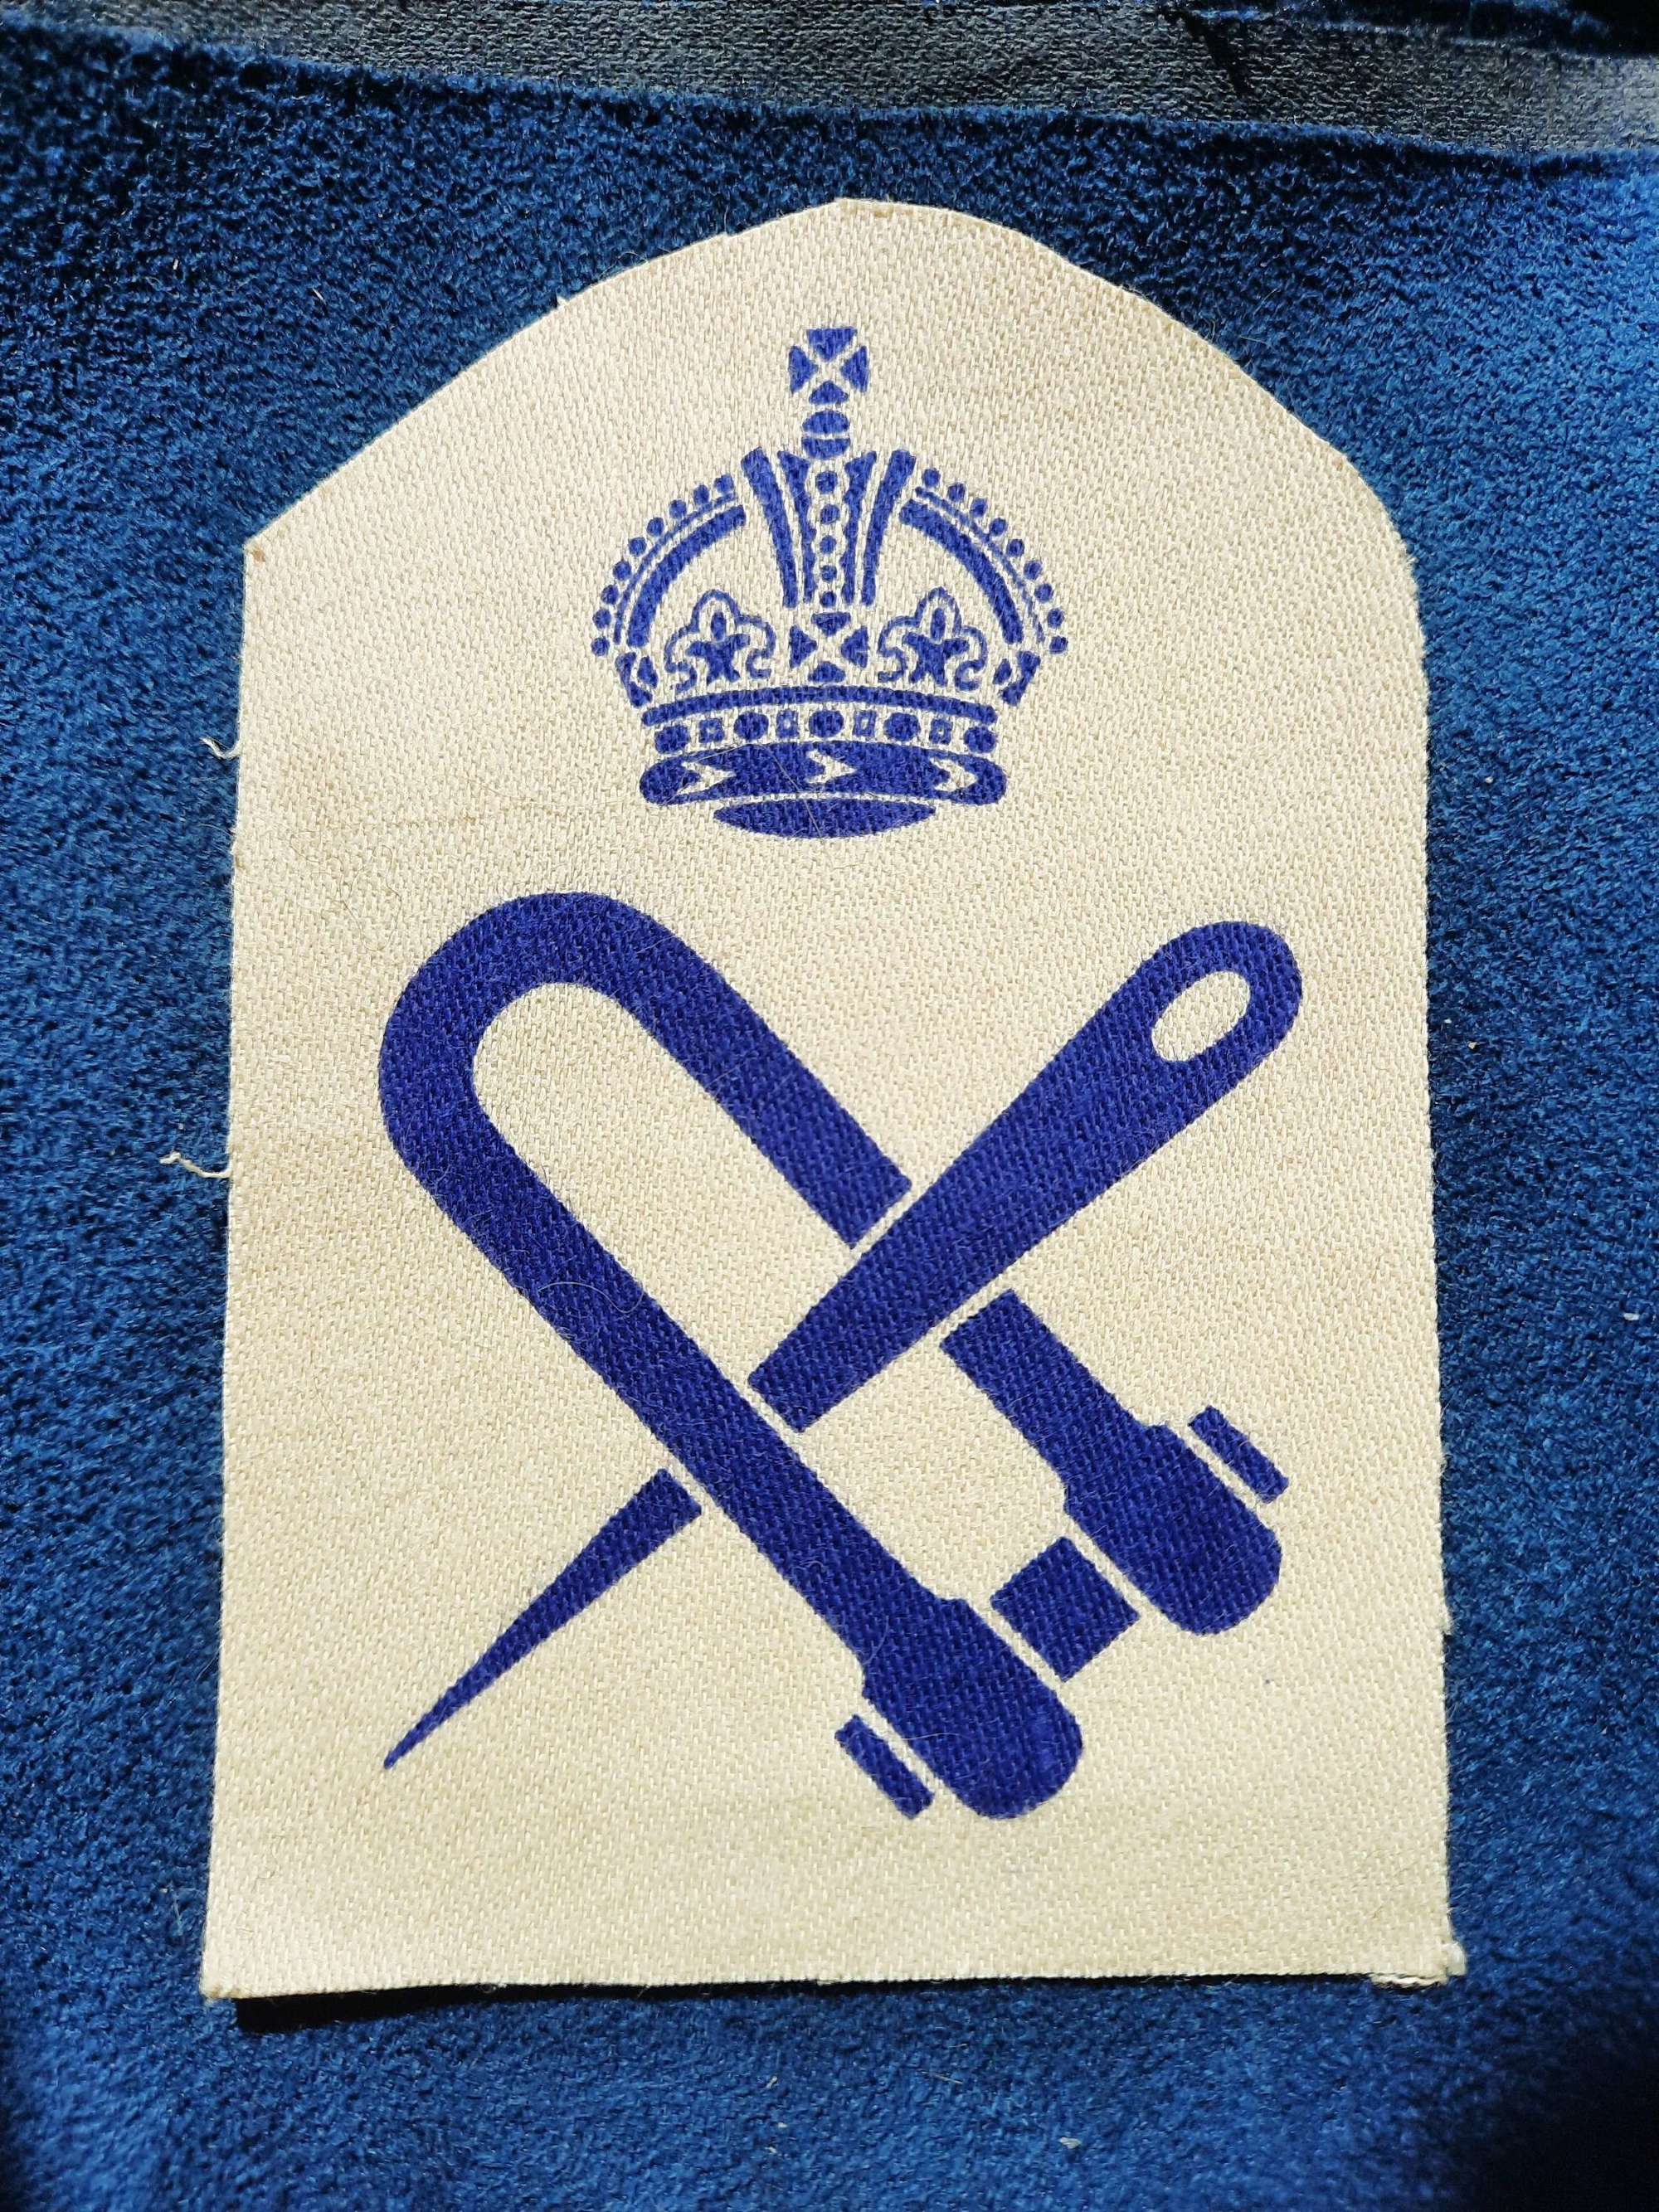 Royal Navy Boom Defence Rating Patch